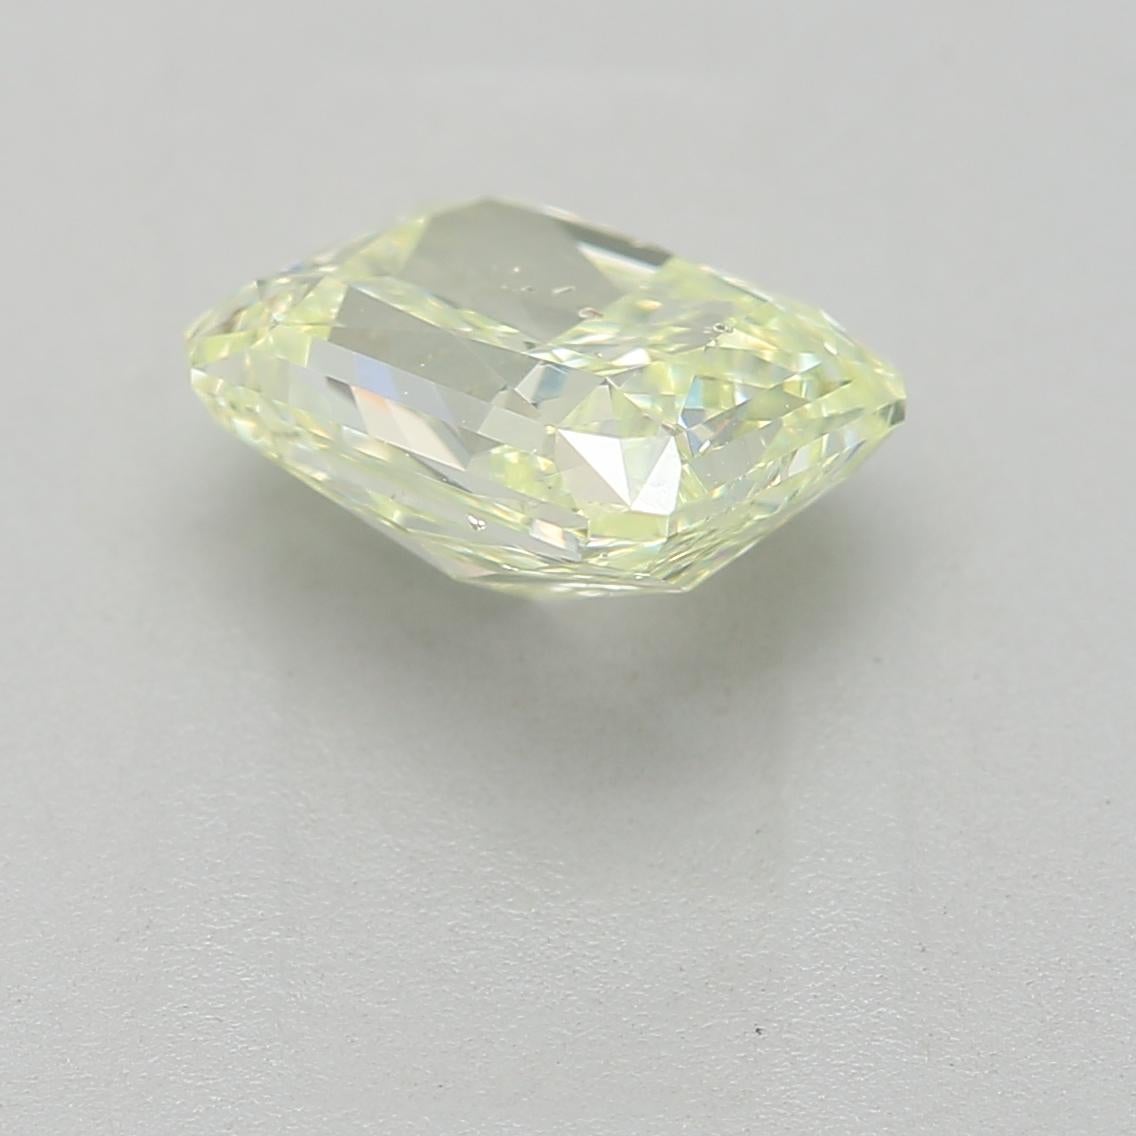 Radiant Cut 1.11-CARAT, FANCY YELLOW GREEN, Radiant, SI2-CLARITY, GIA , SKU-7550 For Sale